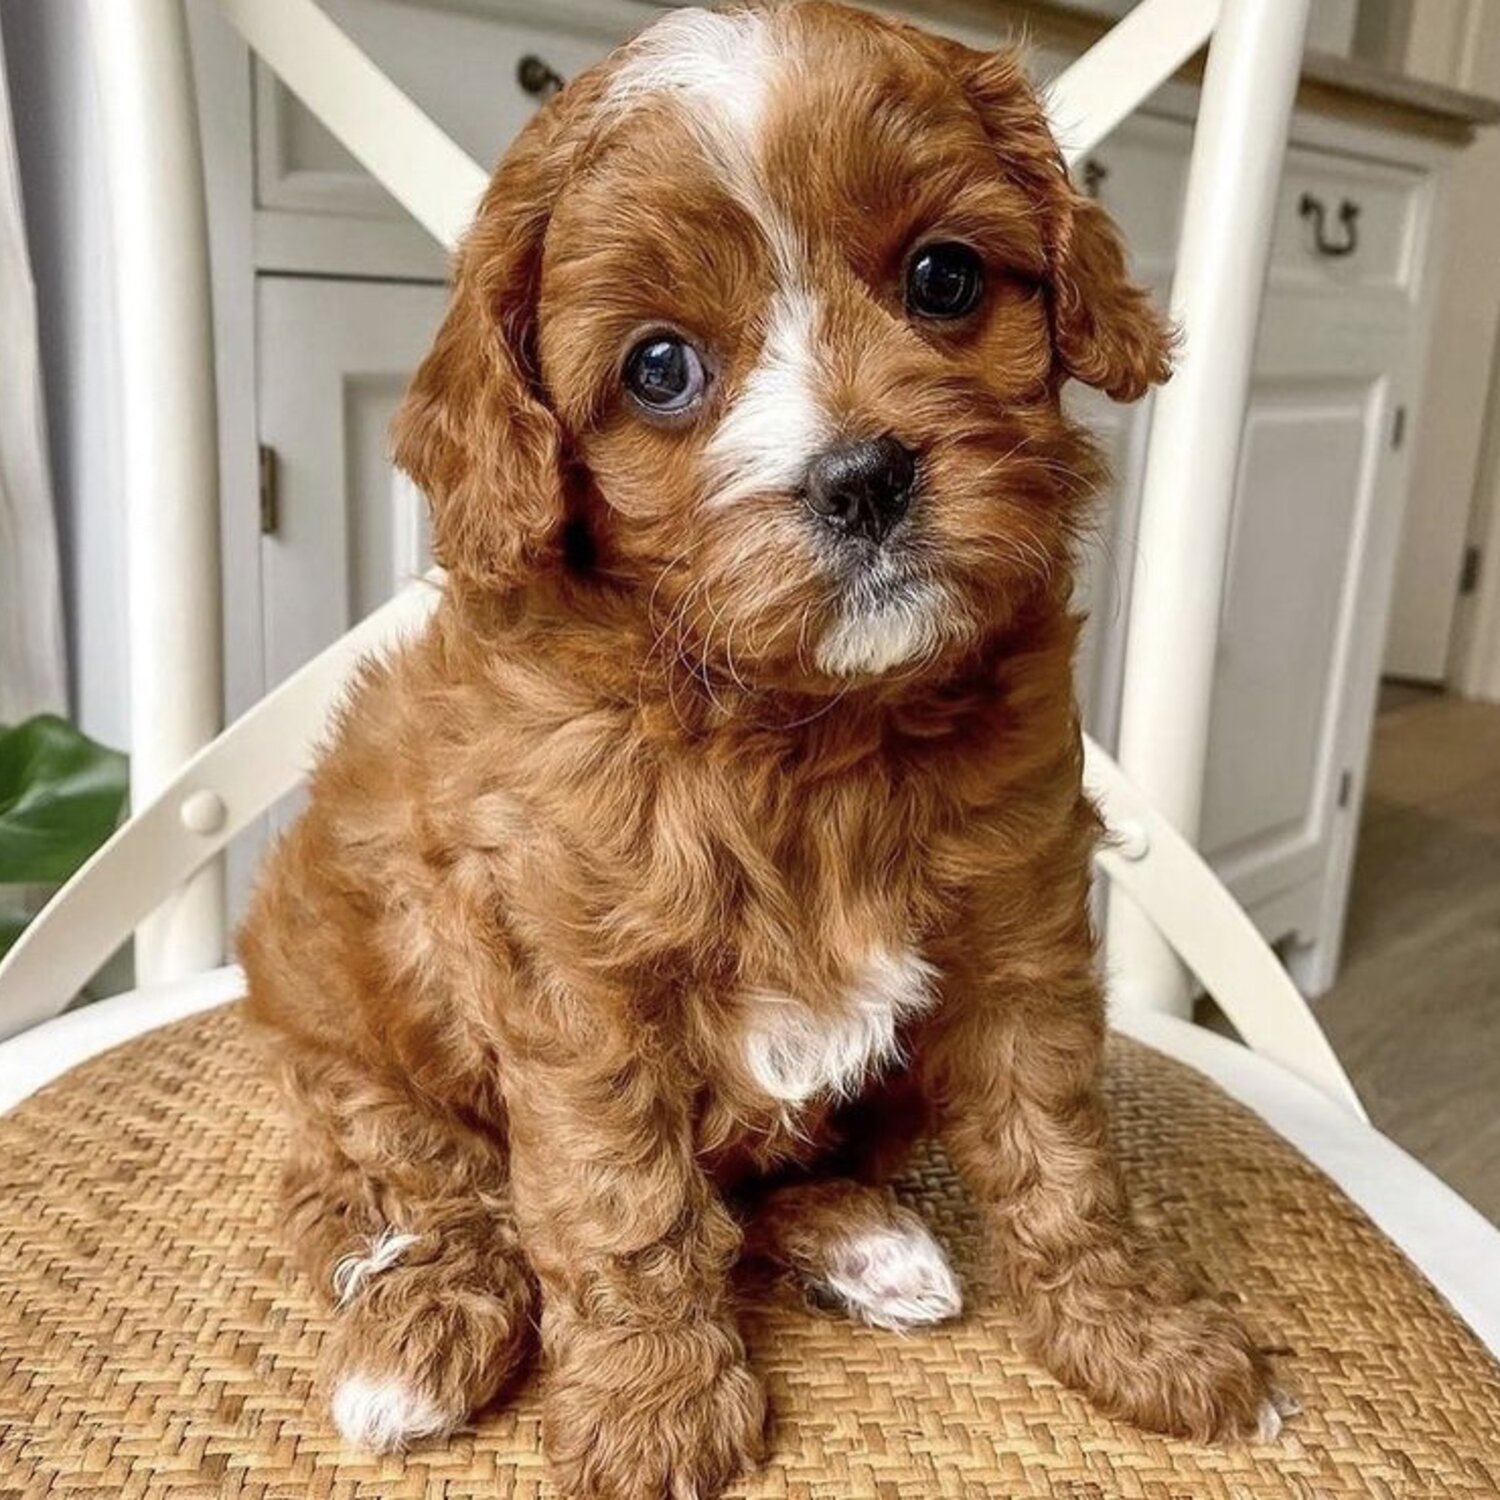 Beautiful Cavoodle (Cavalier x Toy Poodle) Puppies